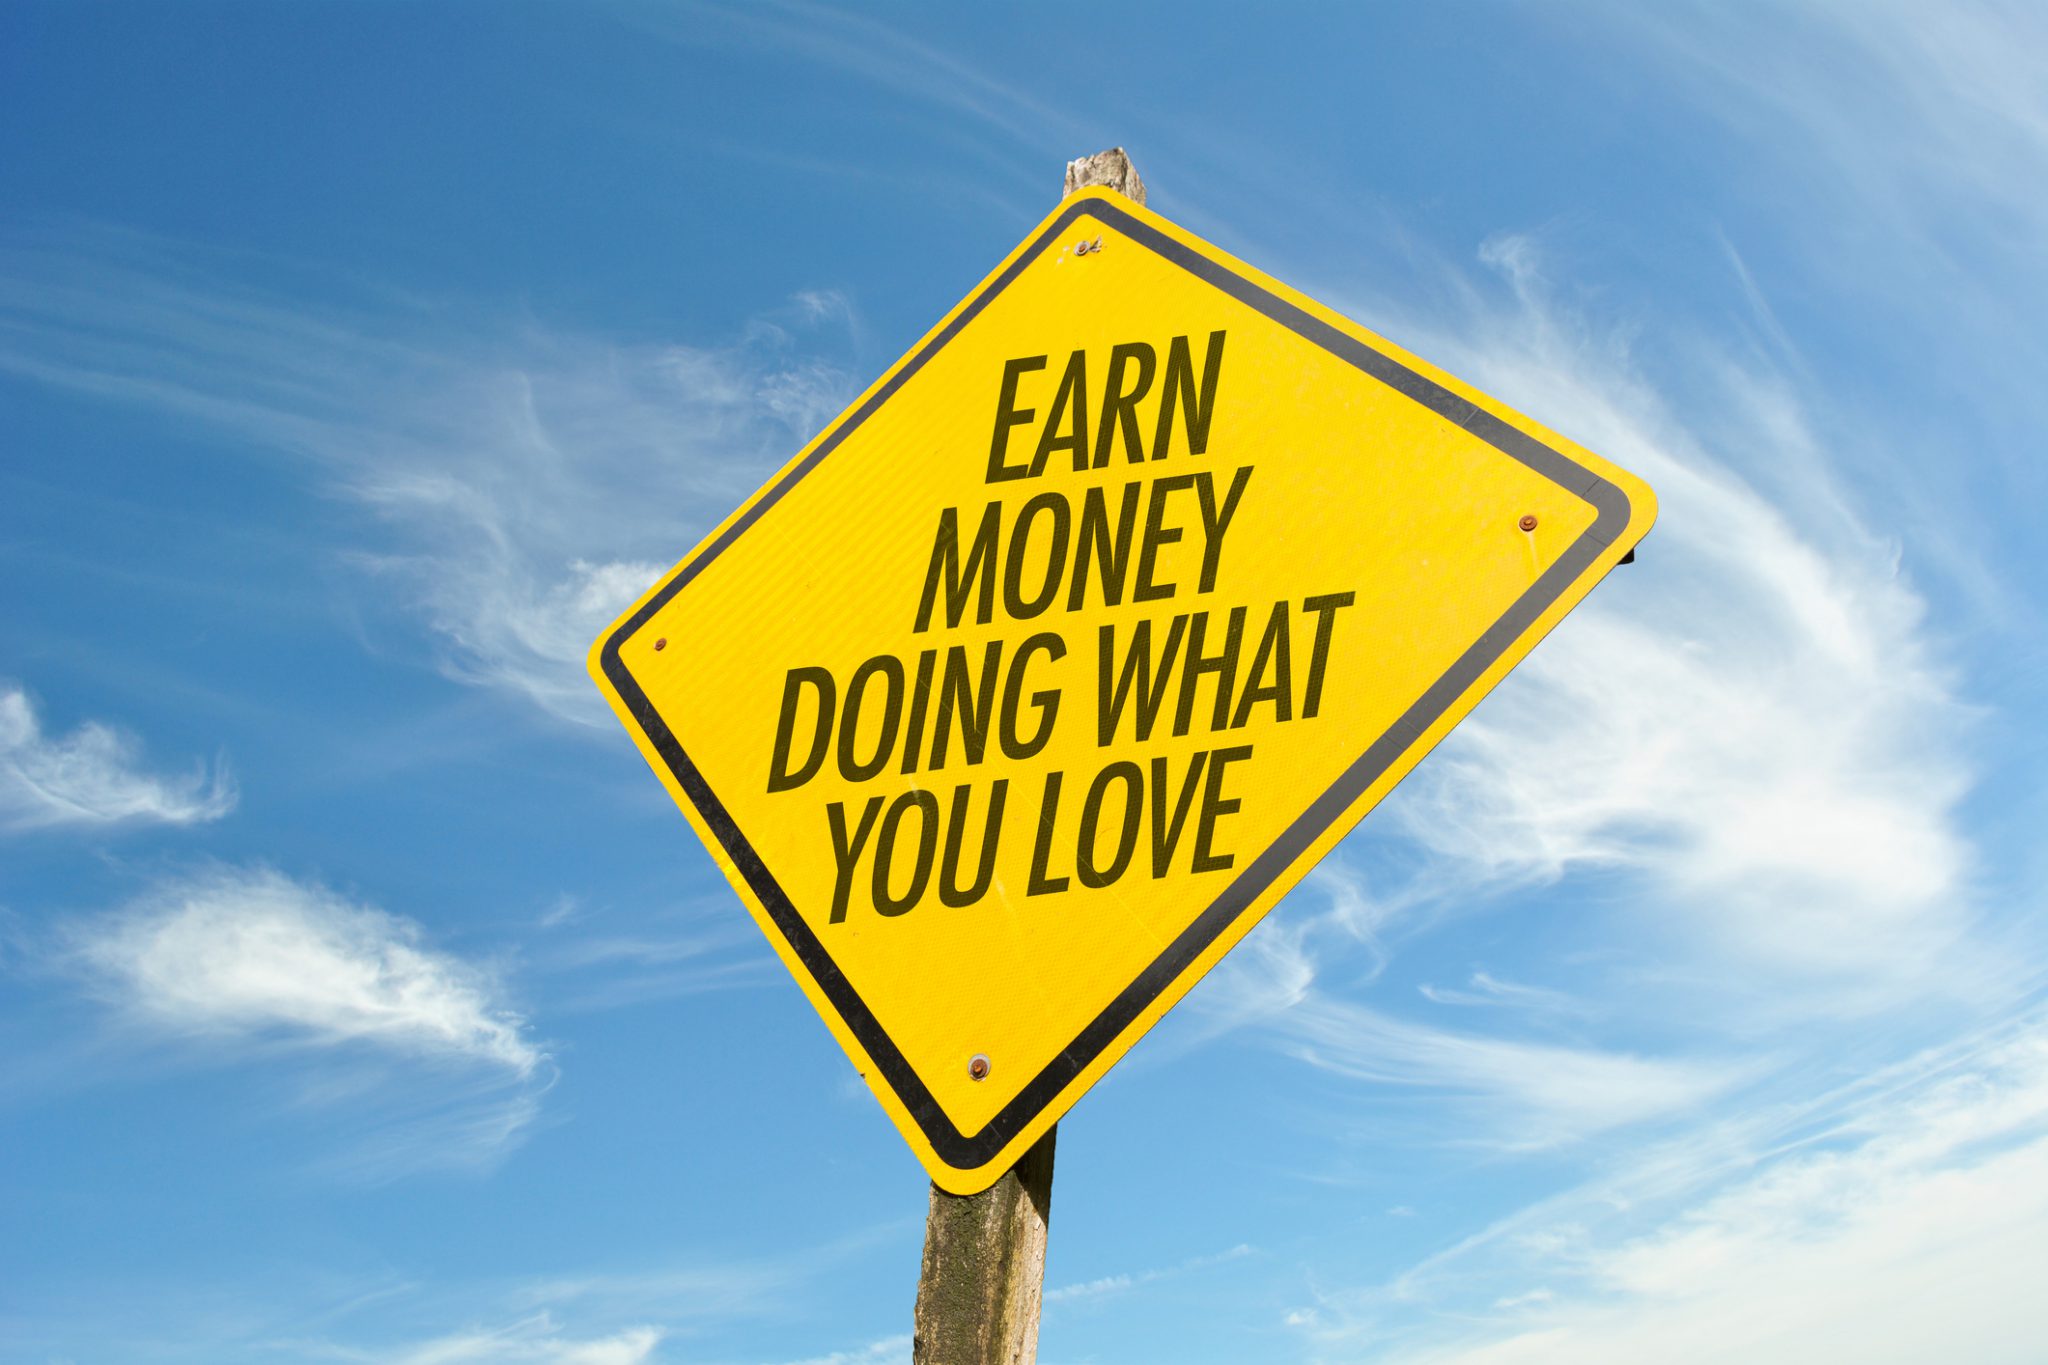 earn money doing what you love sign